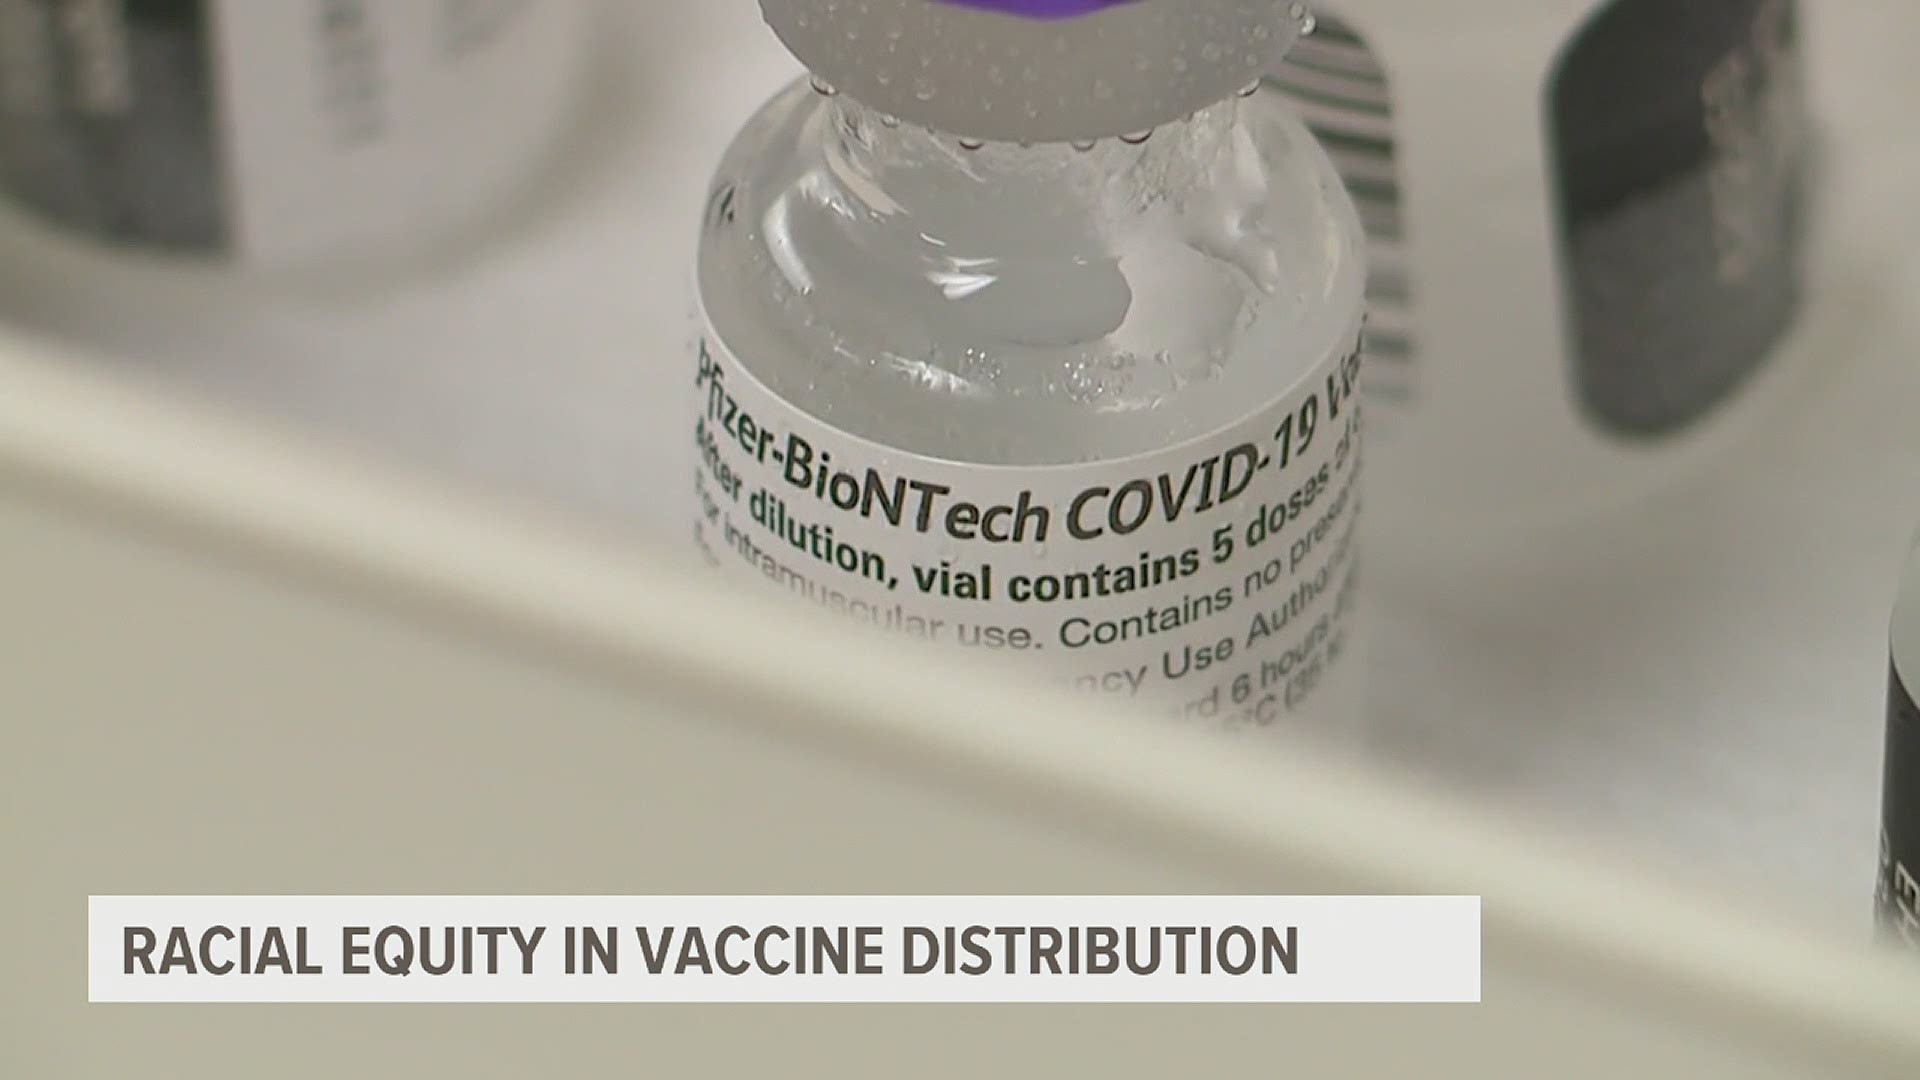 Dr. Anita Chandra, of the Rand Corporation, spoke with FOX43's Jackie De Tore about the role that racism plays in health, and thus the COVID-19 vaccine roll out.